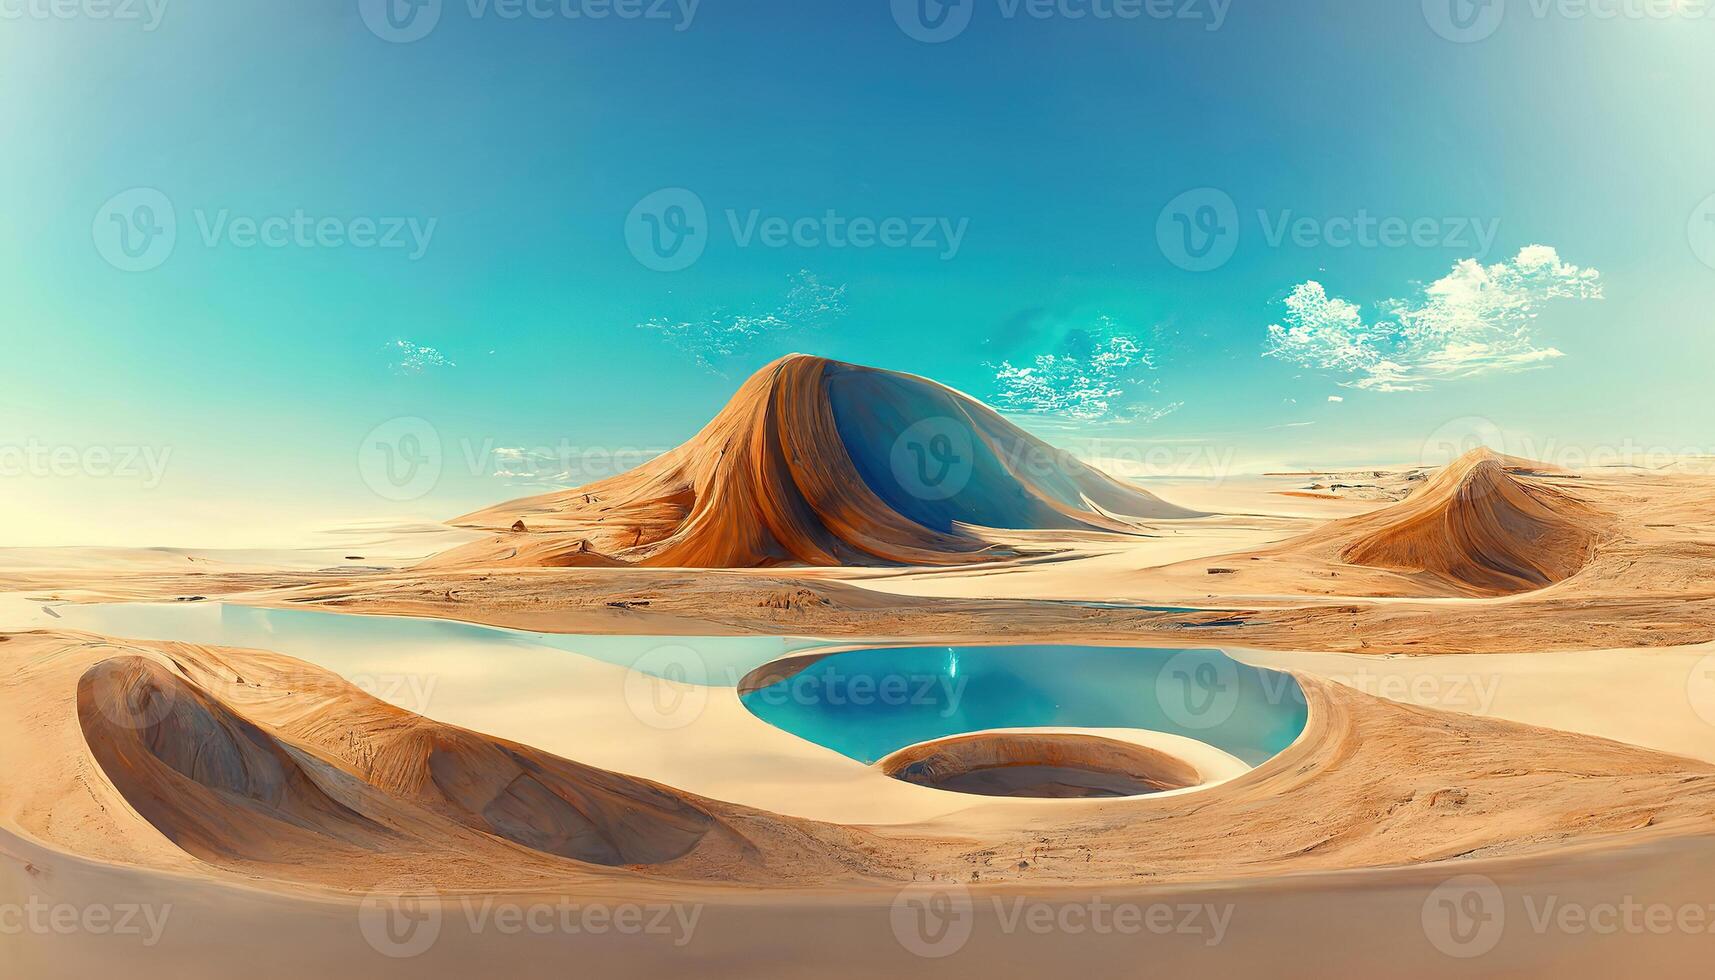 3d desert scene with oasis of water and palm trees. photo